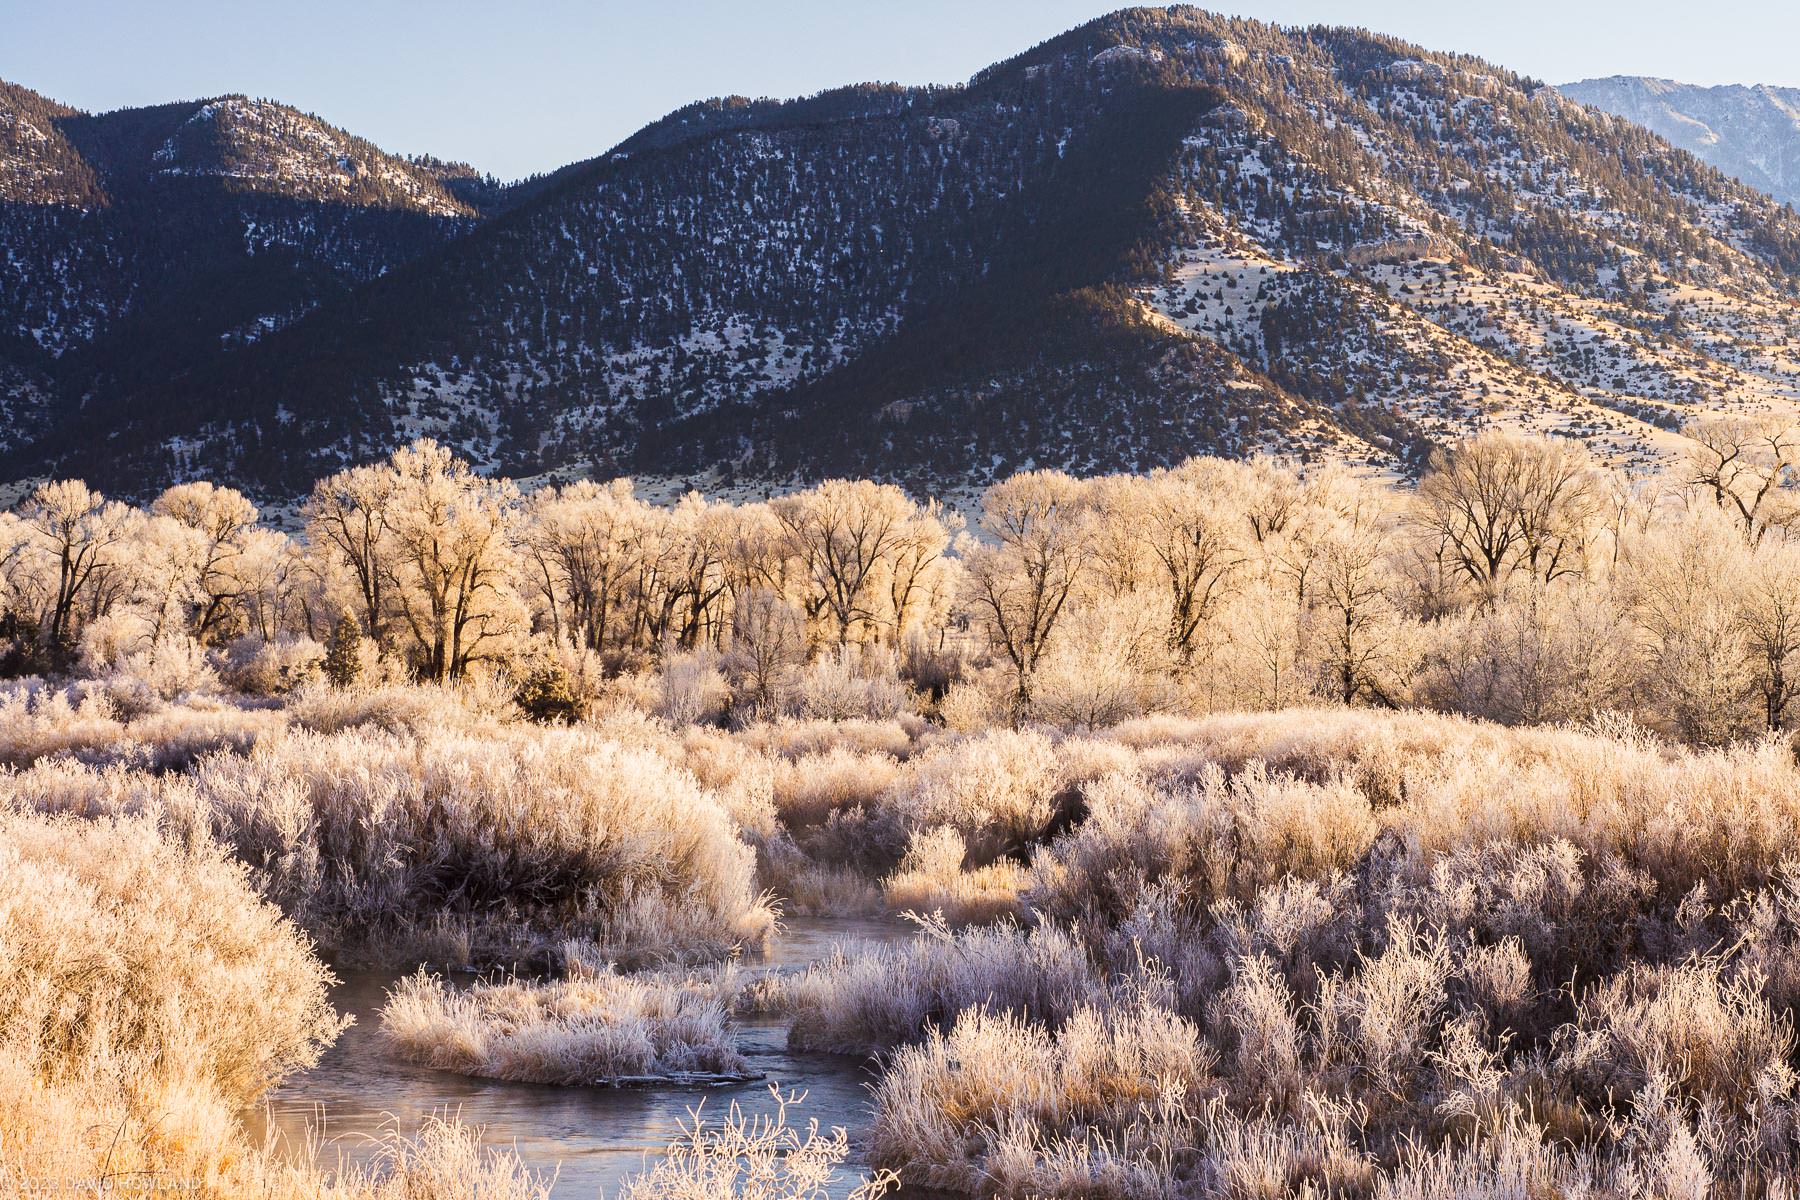 A photo of the Yellowstone River curving through a field of shrubs covered in ice illuminated yellow by the rising sun.